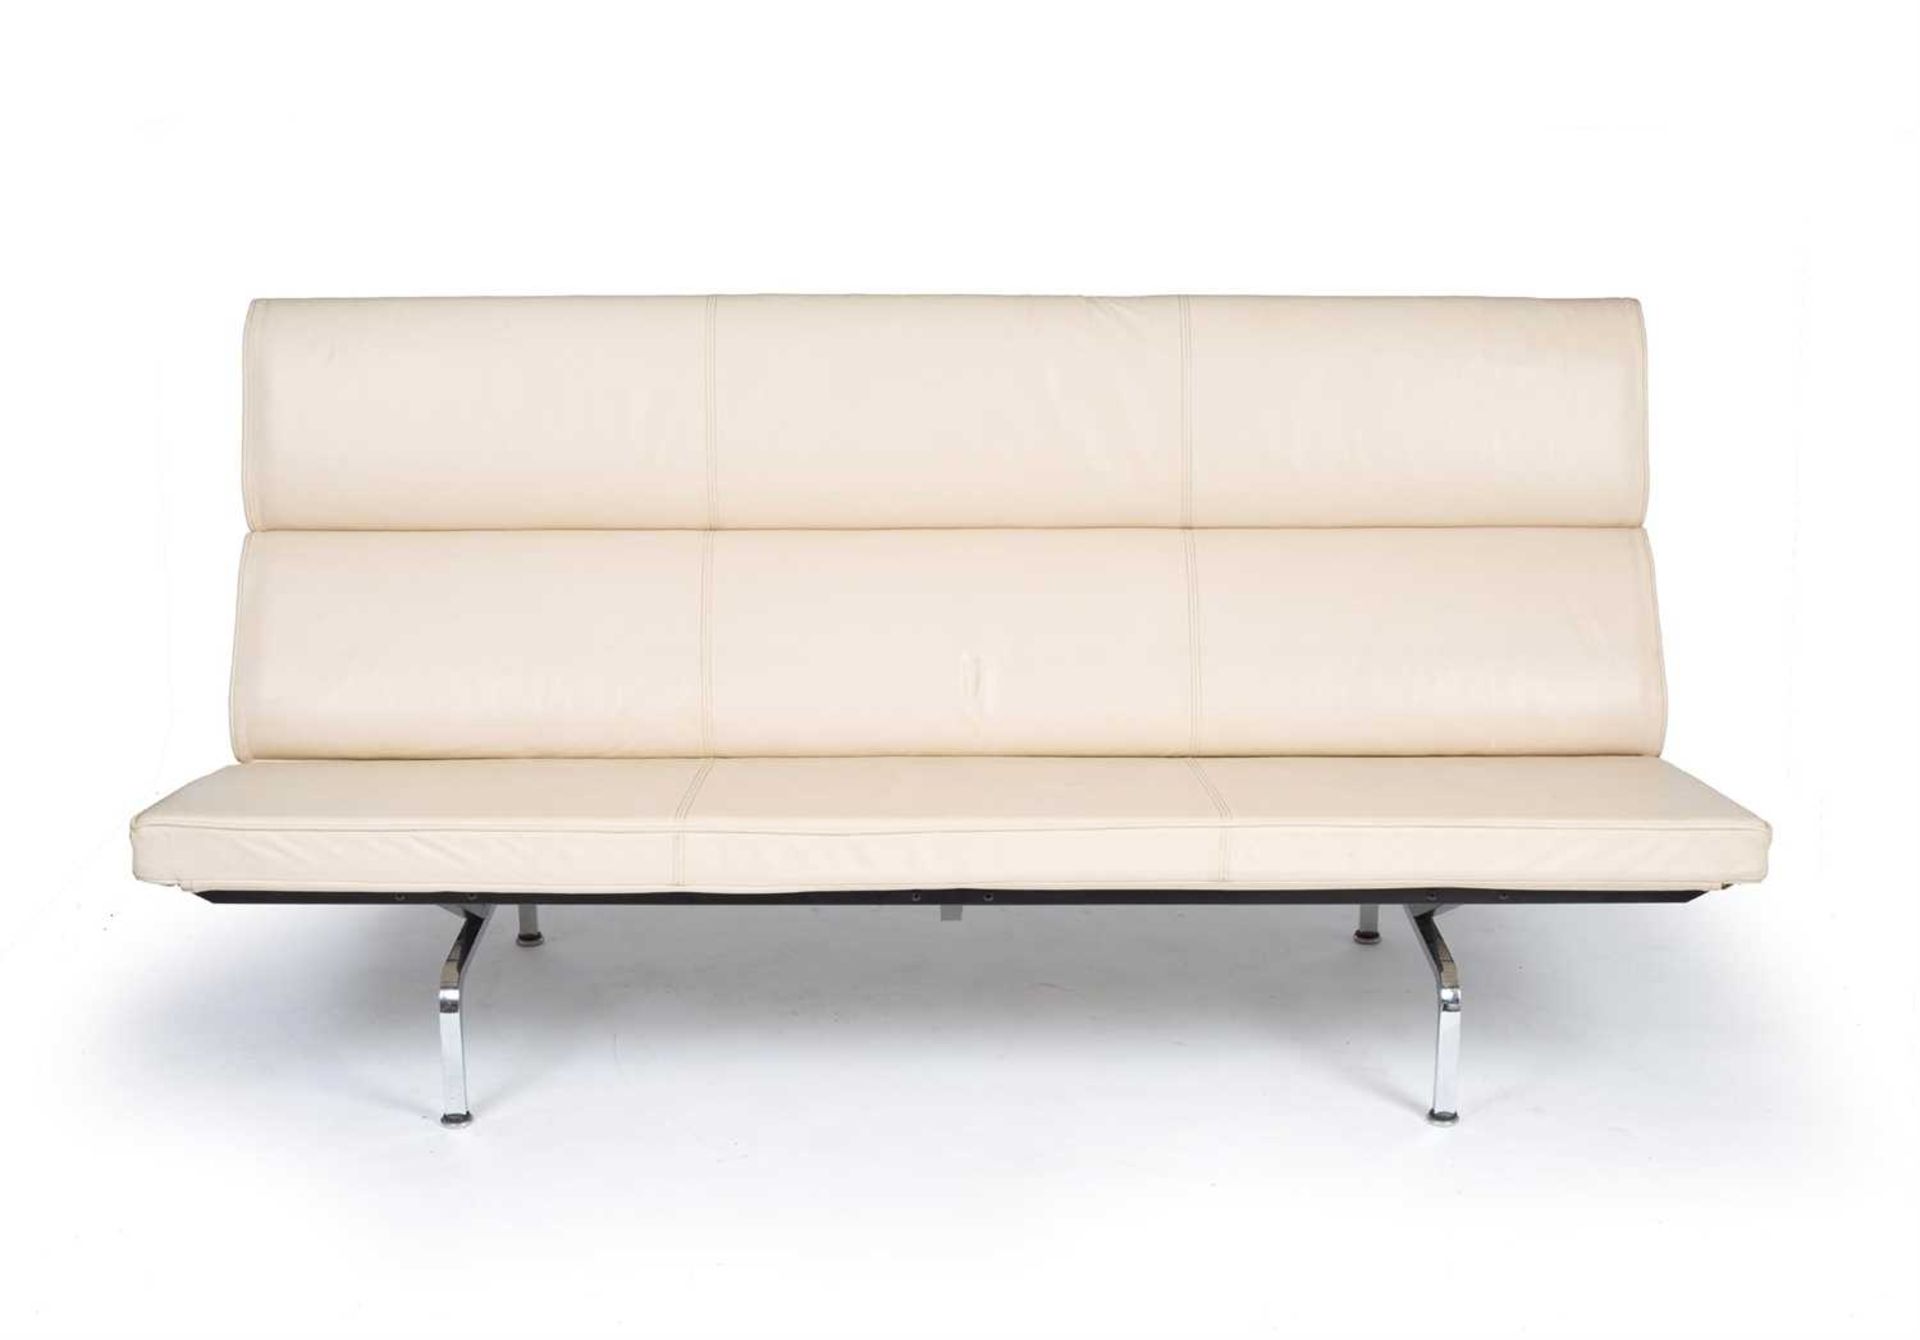 Charles and Ray Eames for Herman Miller Compact sofa upholstered in cream leather, over chromed - Image 2 of 2